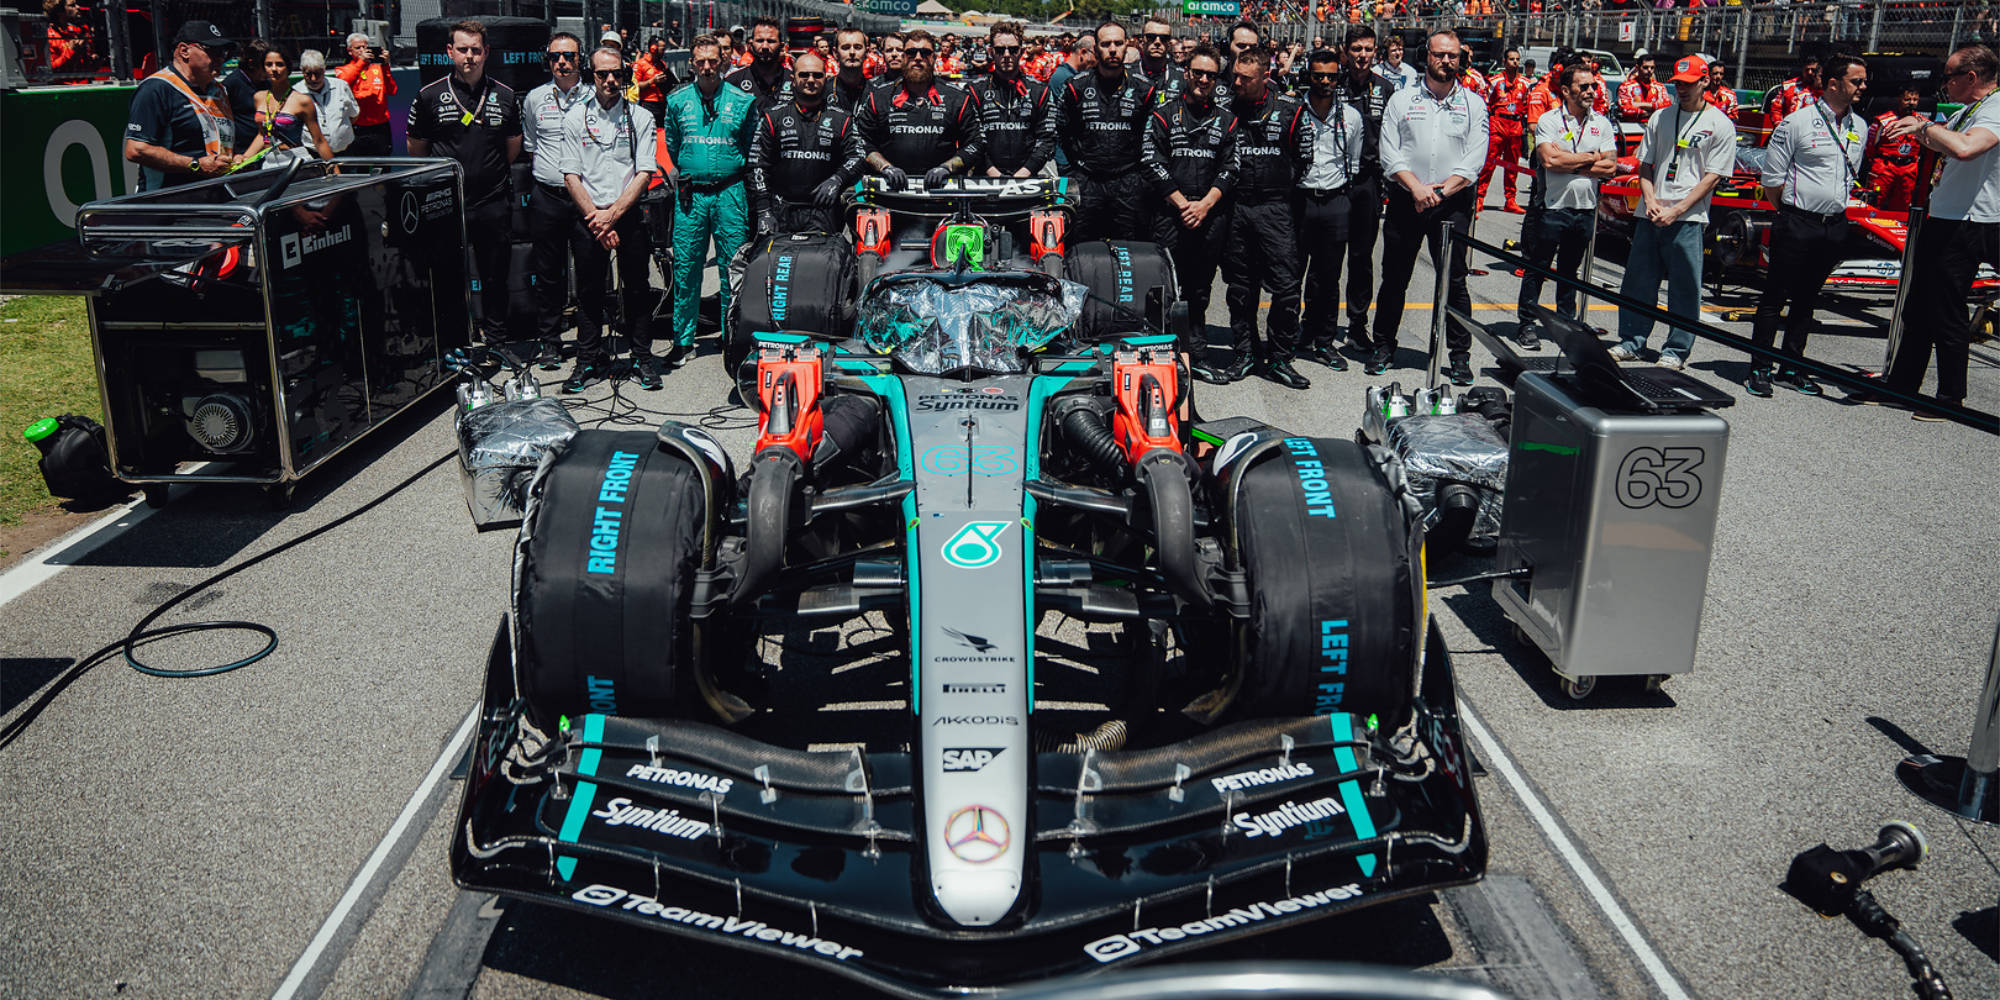 Mercedes team stand behind George Russell's 63 car on the starting grid at the Spanish Grand Prix. 